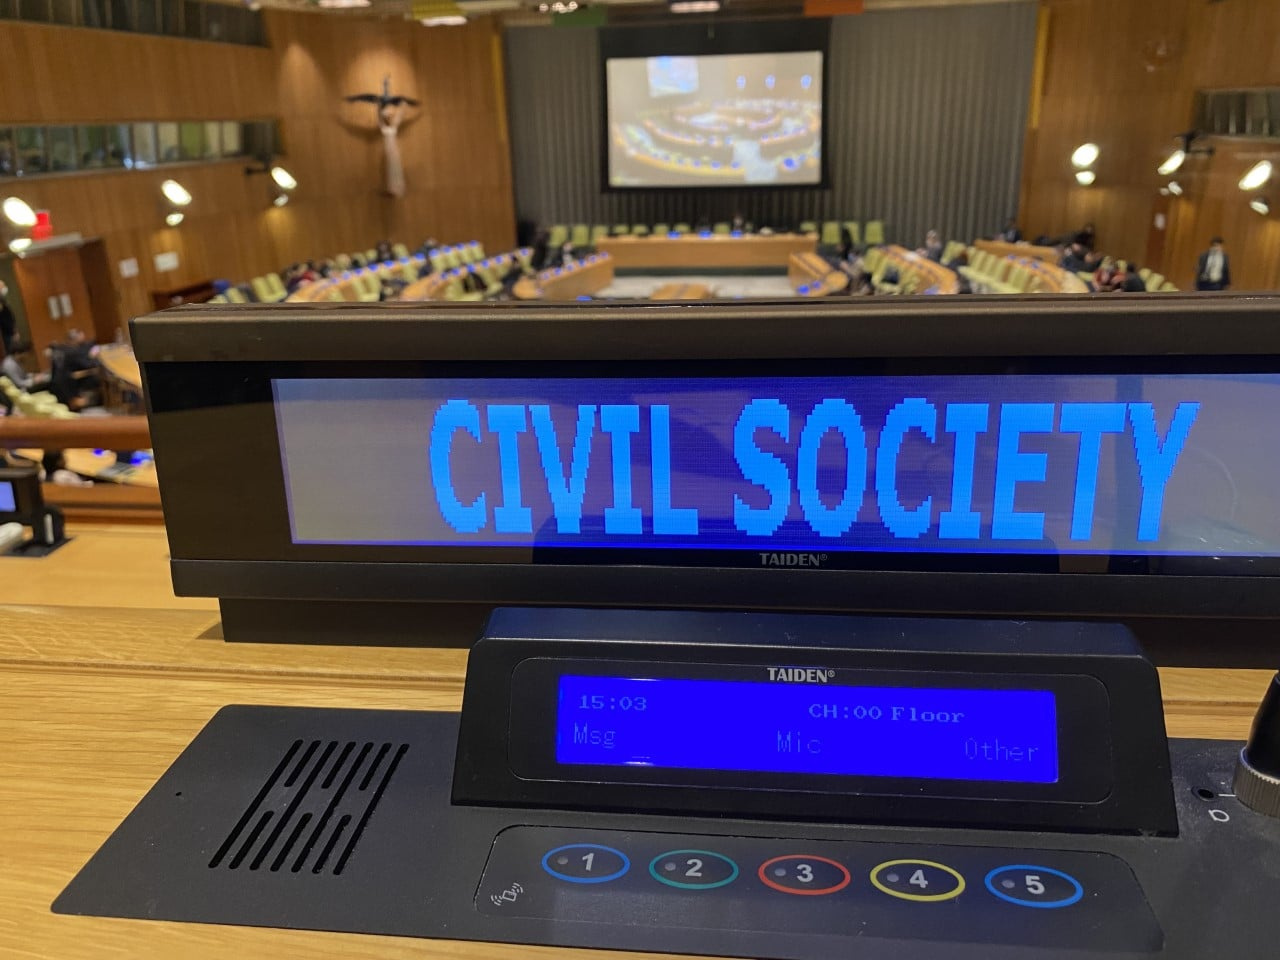 A shot of one of the meeting rooms in UNOG which is seen in the background. The foreground shows the electronic name tag on one of the seats, displaying "Civil Society"